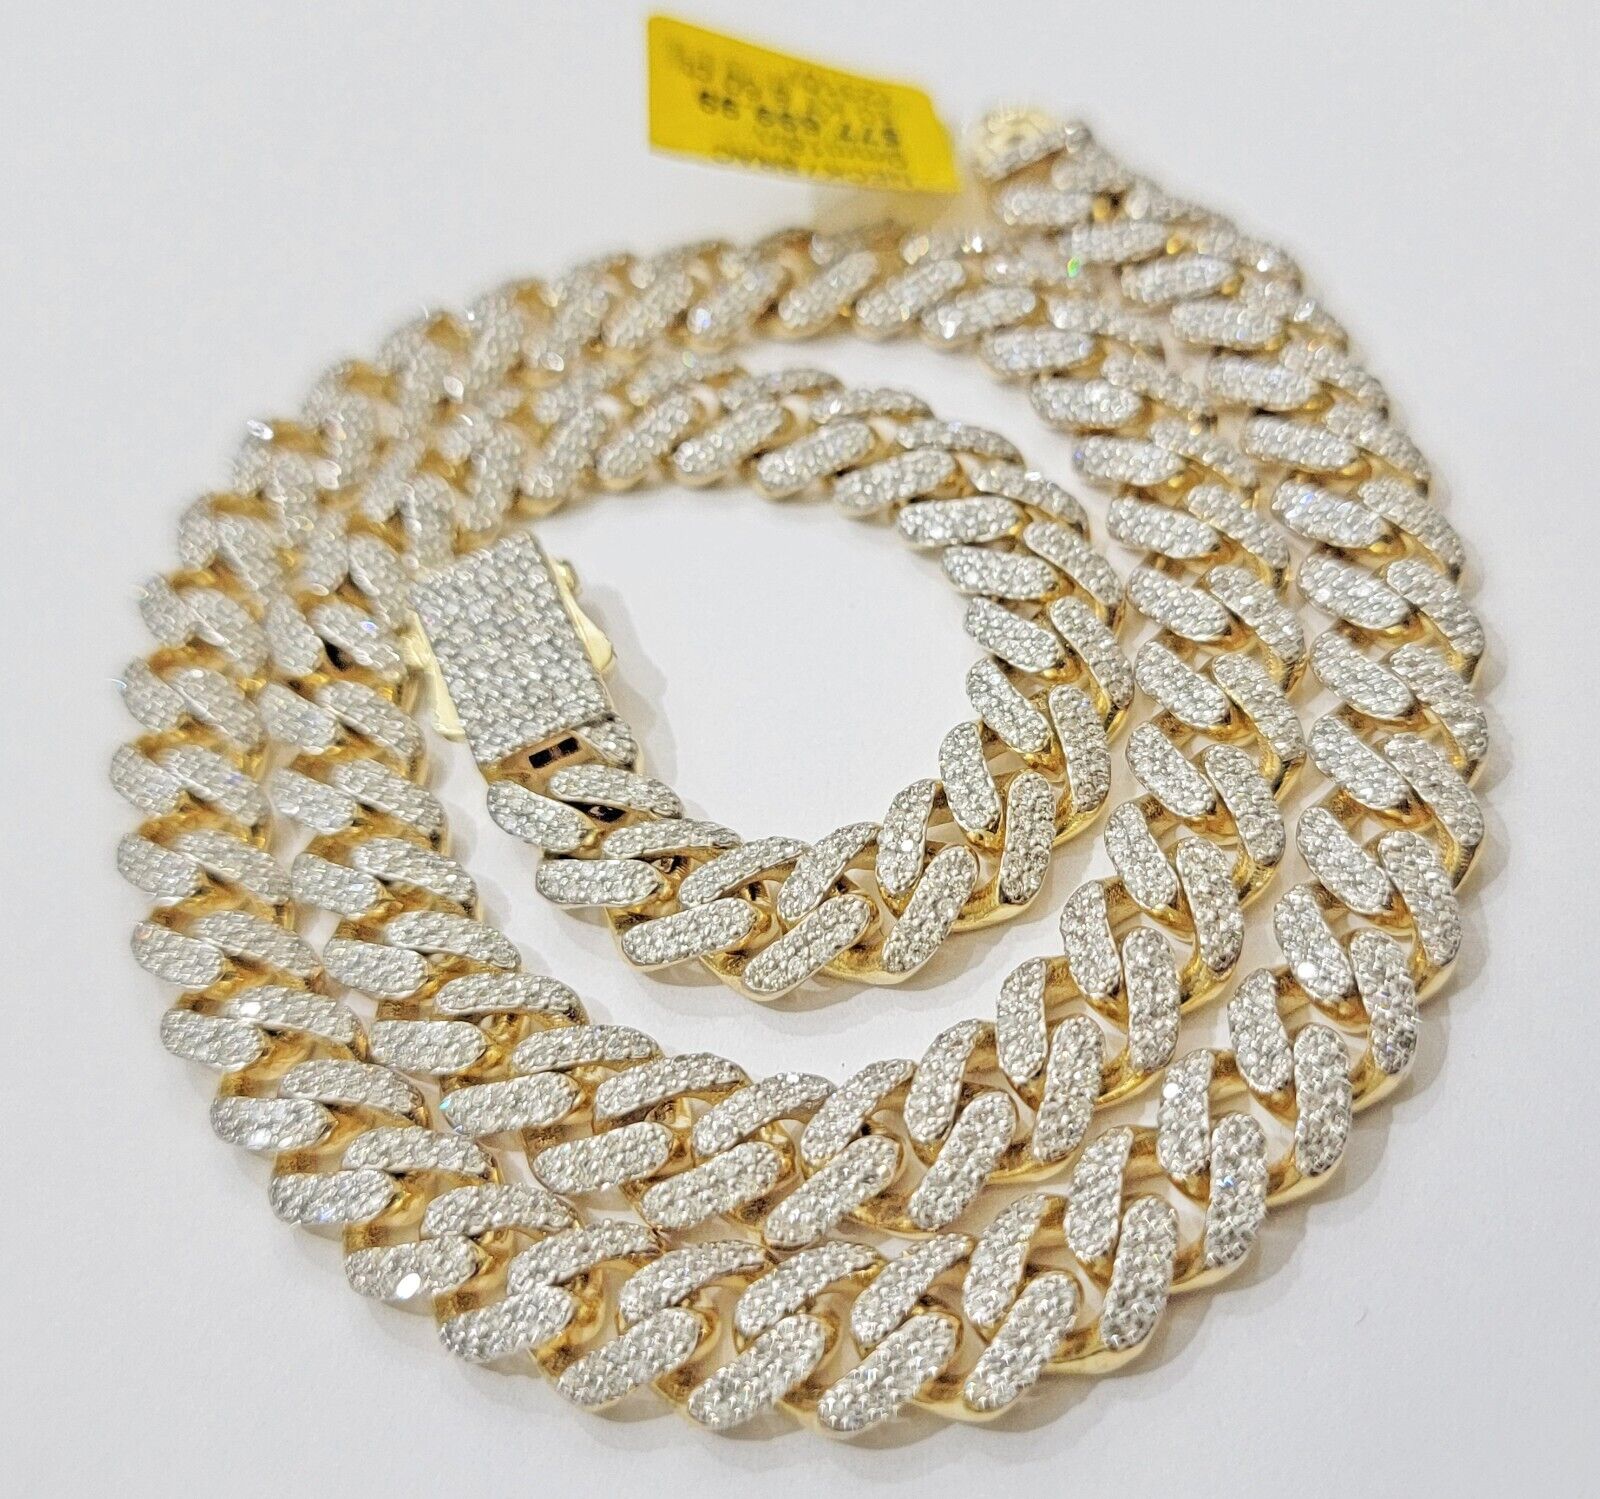 10k Yellow Gold Diamond Chain 18 Inch Necklace 9mm REAL 8.50 CT Dia, MENS CHOKER